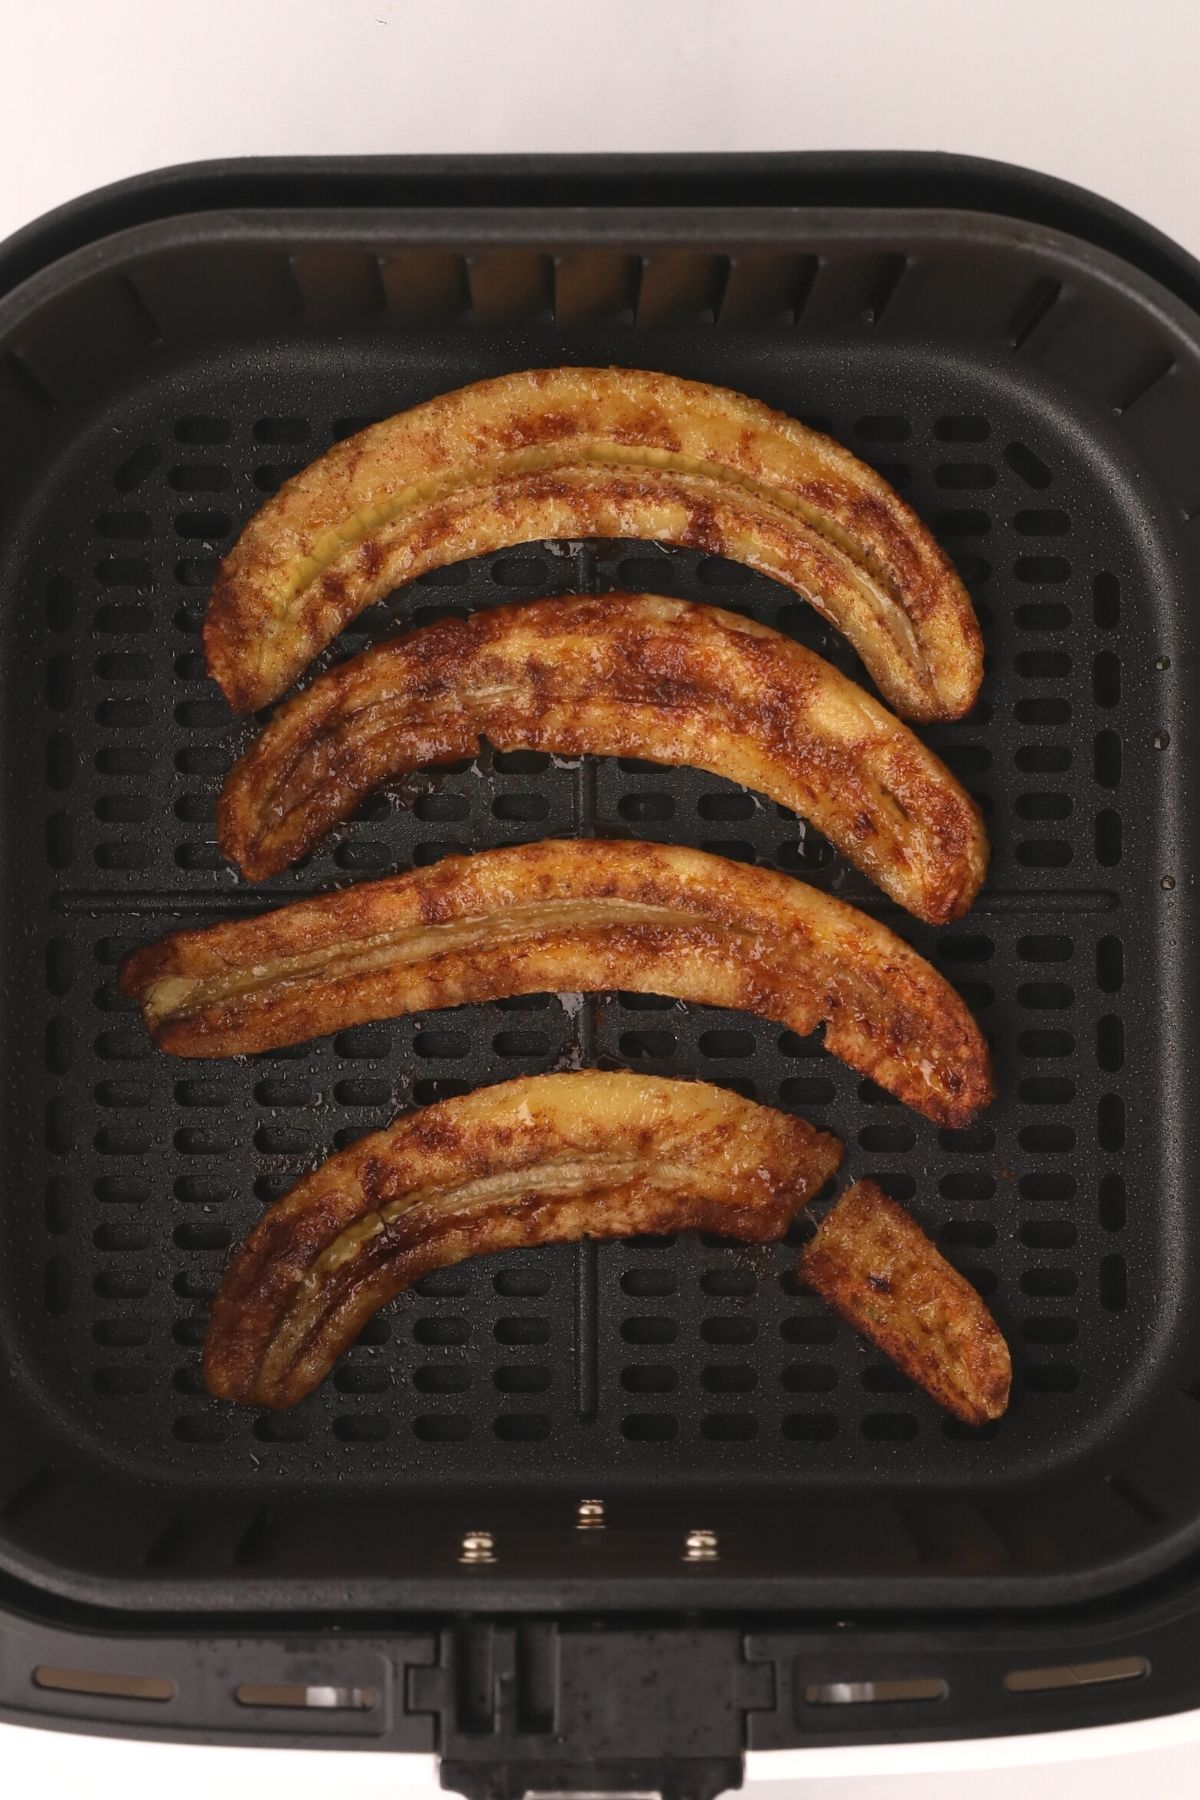 Seasoned bananas in the air fryer basket after being cooked